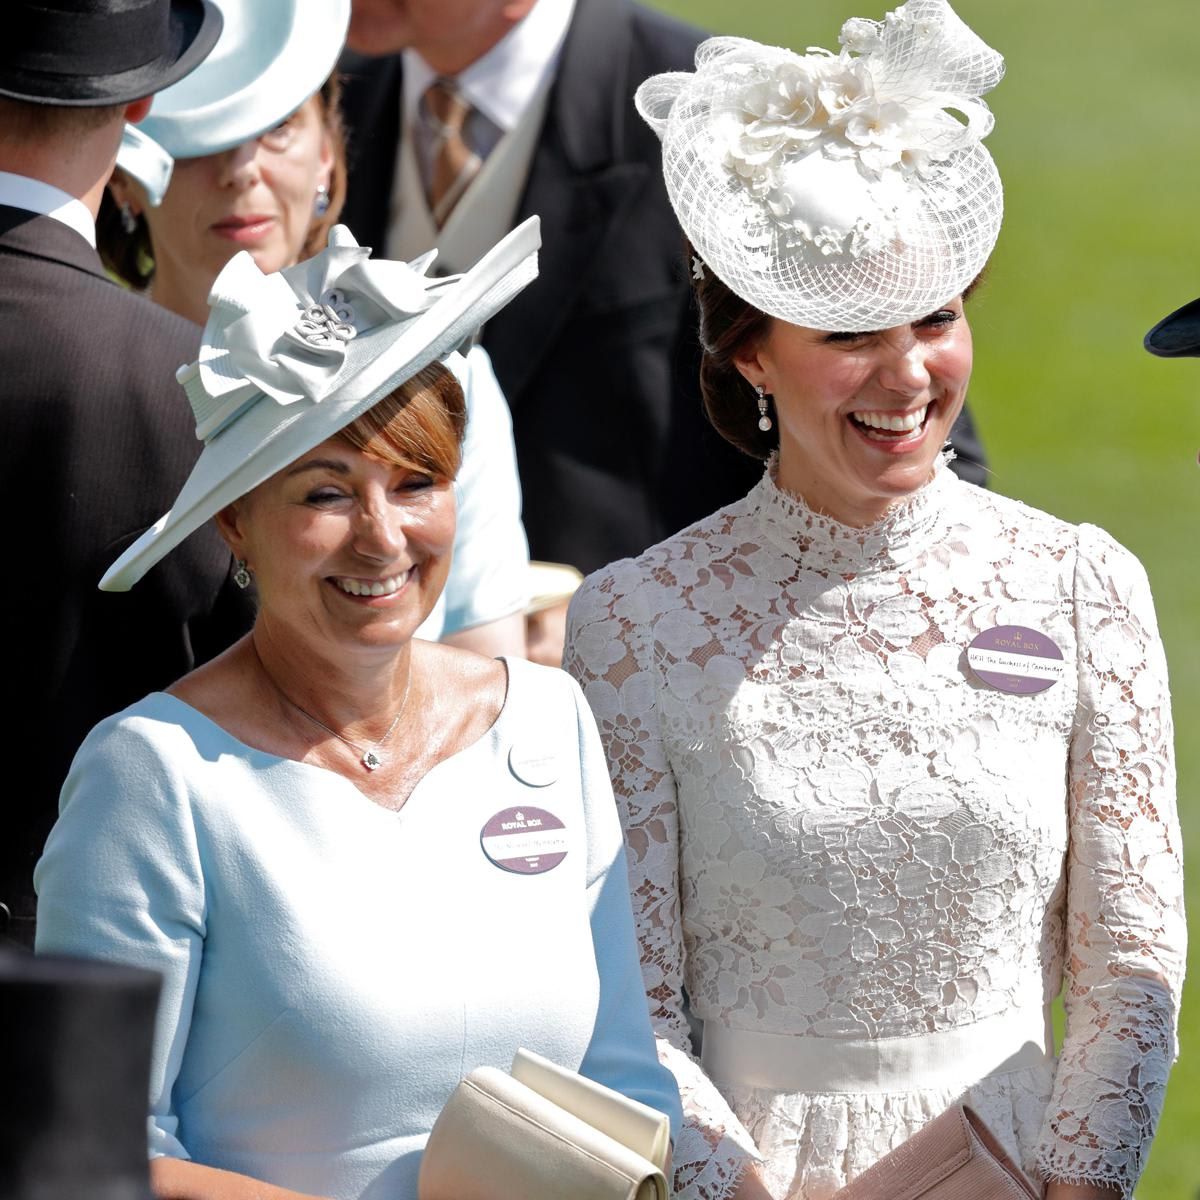 Carole is a mother to Kate, Pippa and James